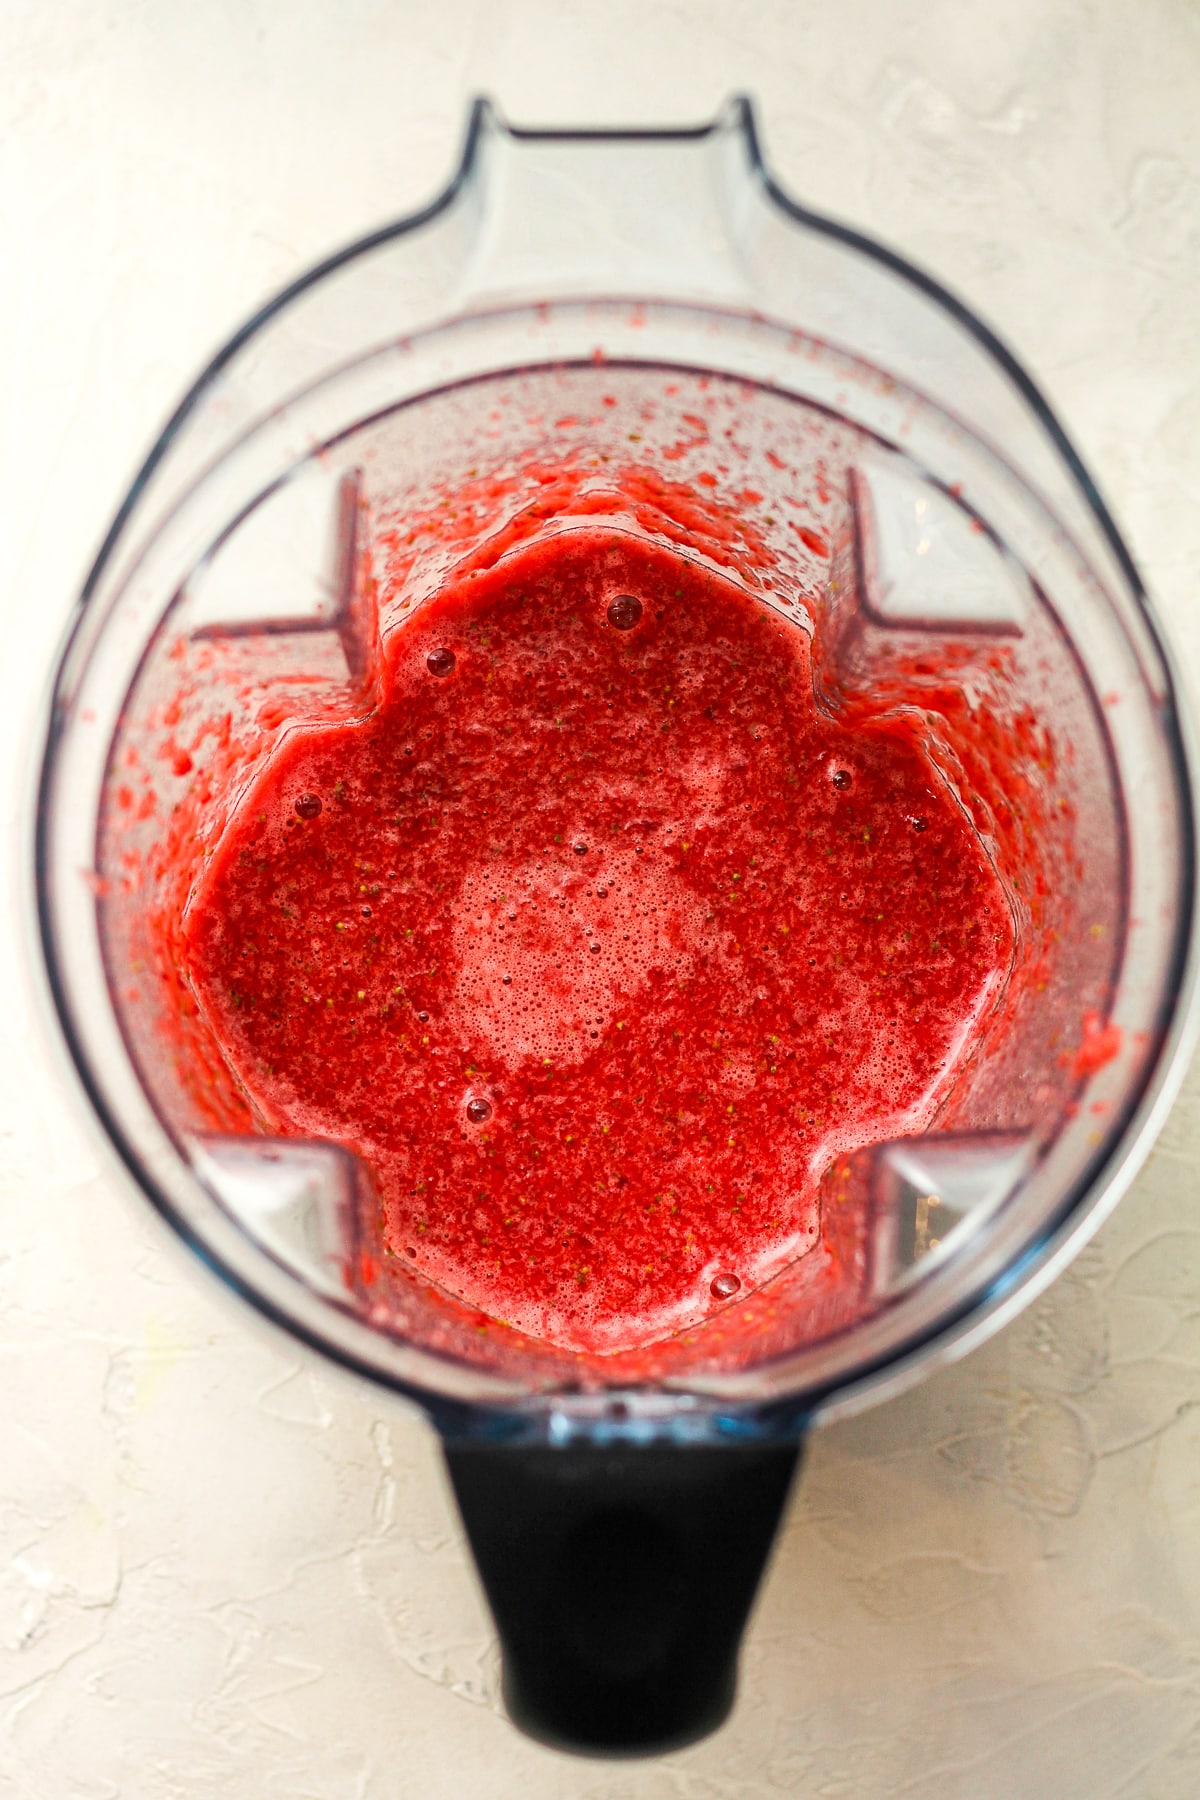 Overhead view of a mixer with pureed strawberries.